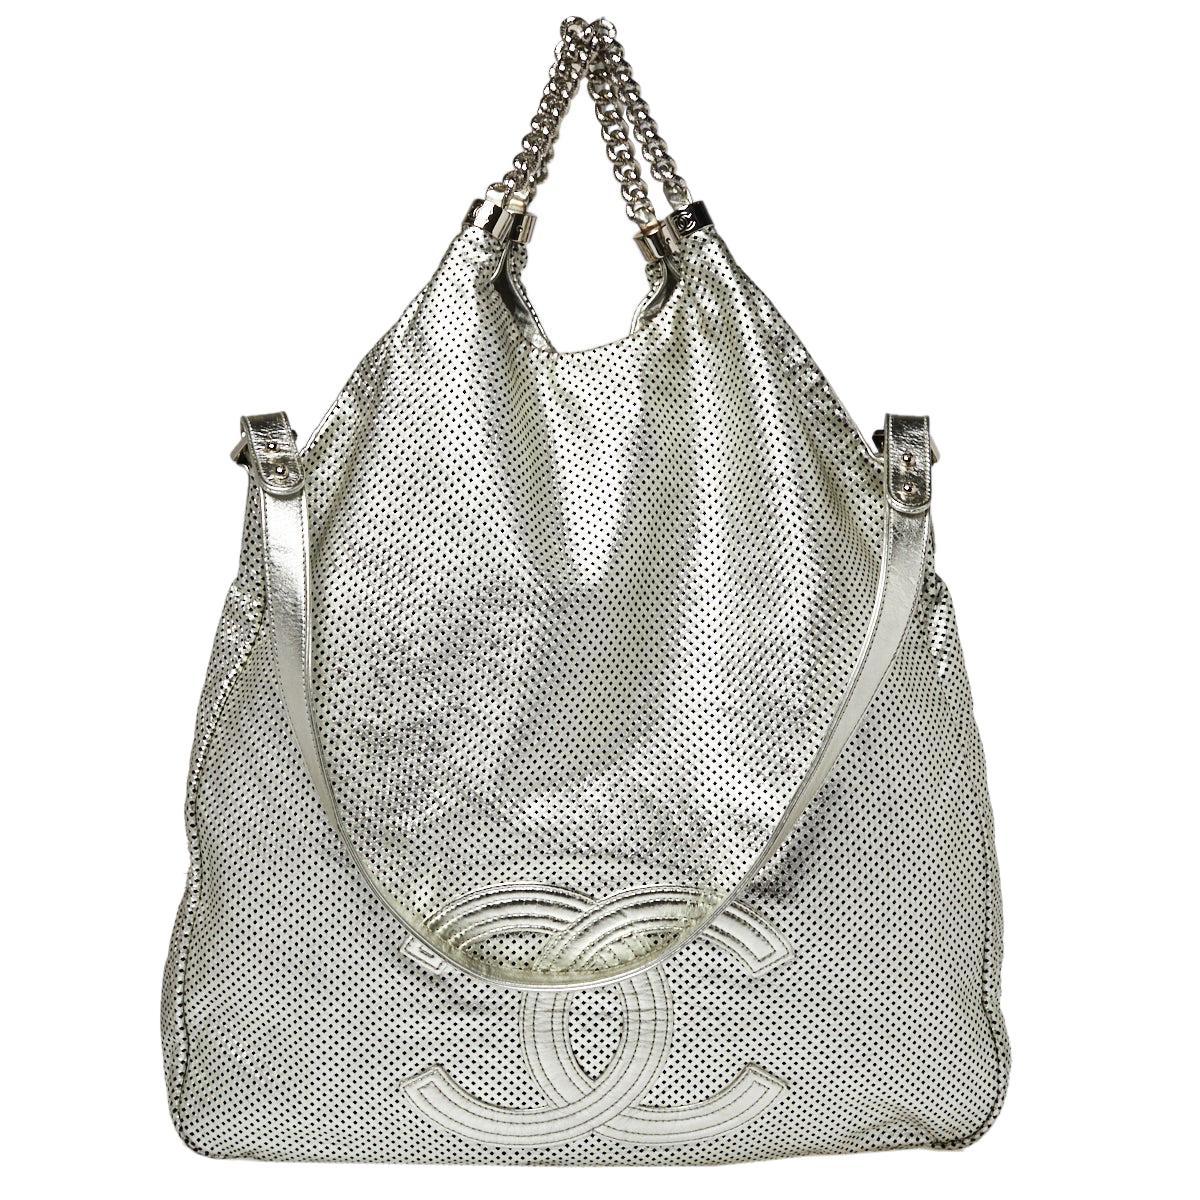 Chanel Perforated Leather Shoulder Bag - Silver